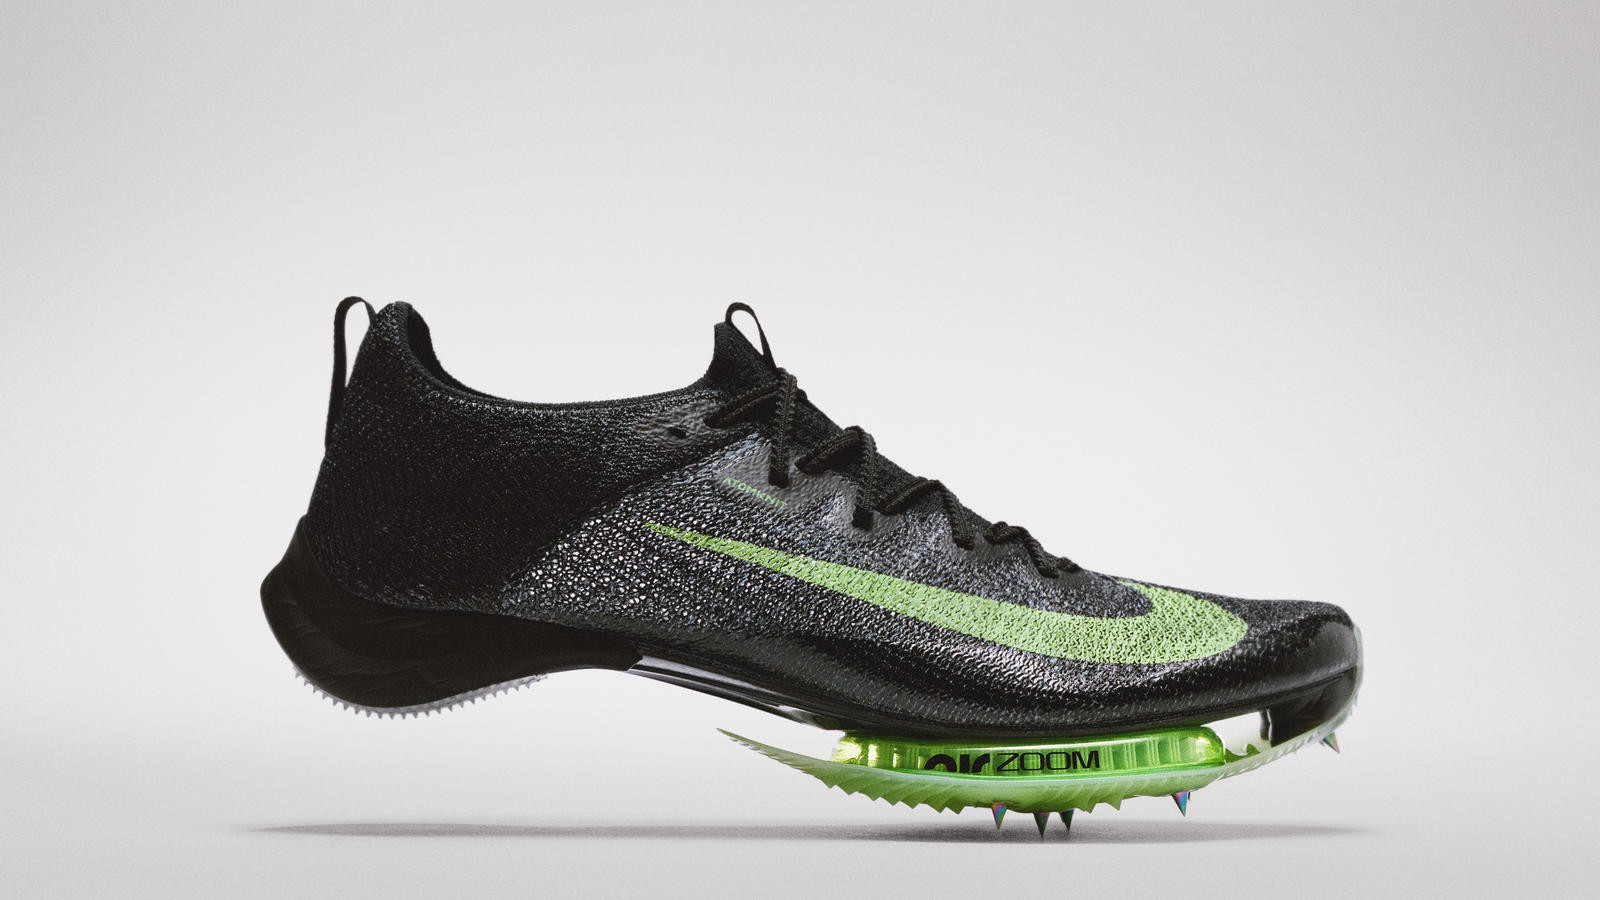 This new spike technology has a place in sport, provided everyone has reasonable access